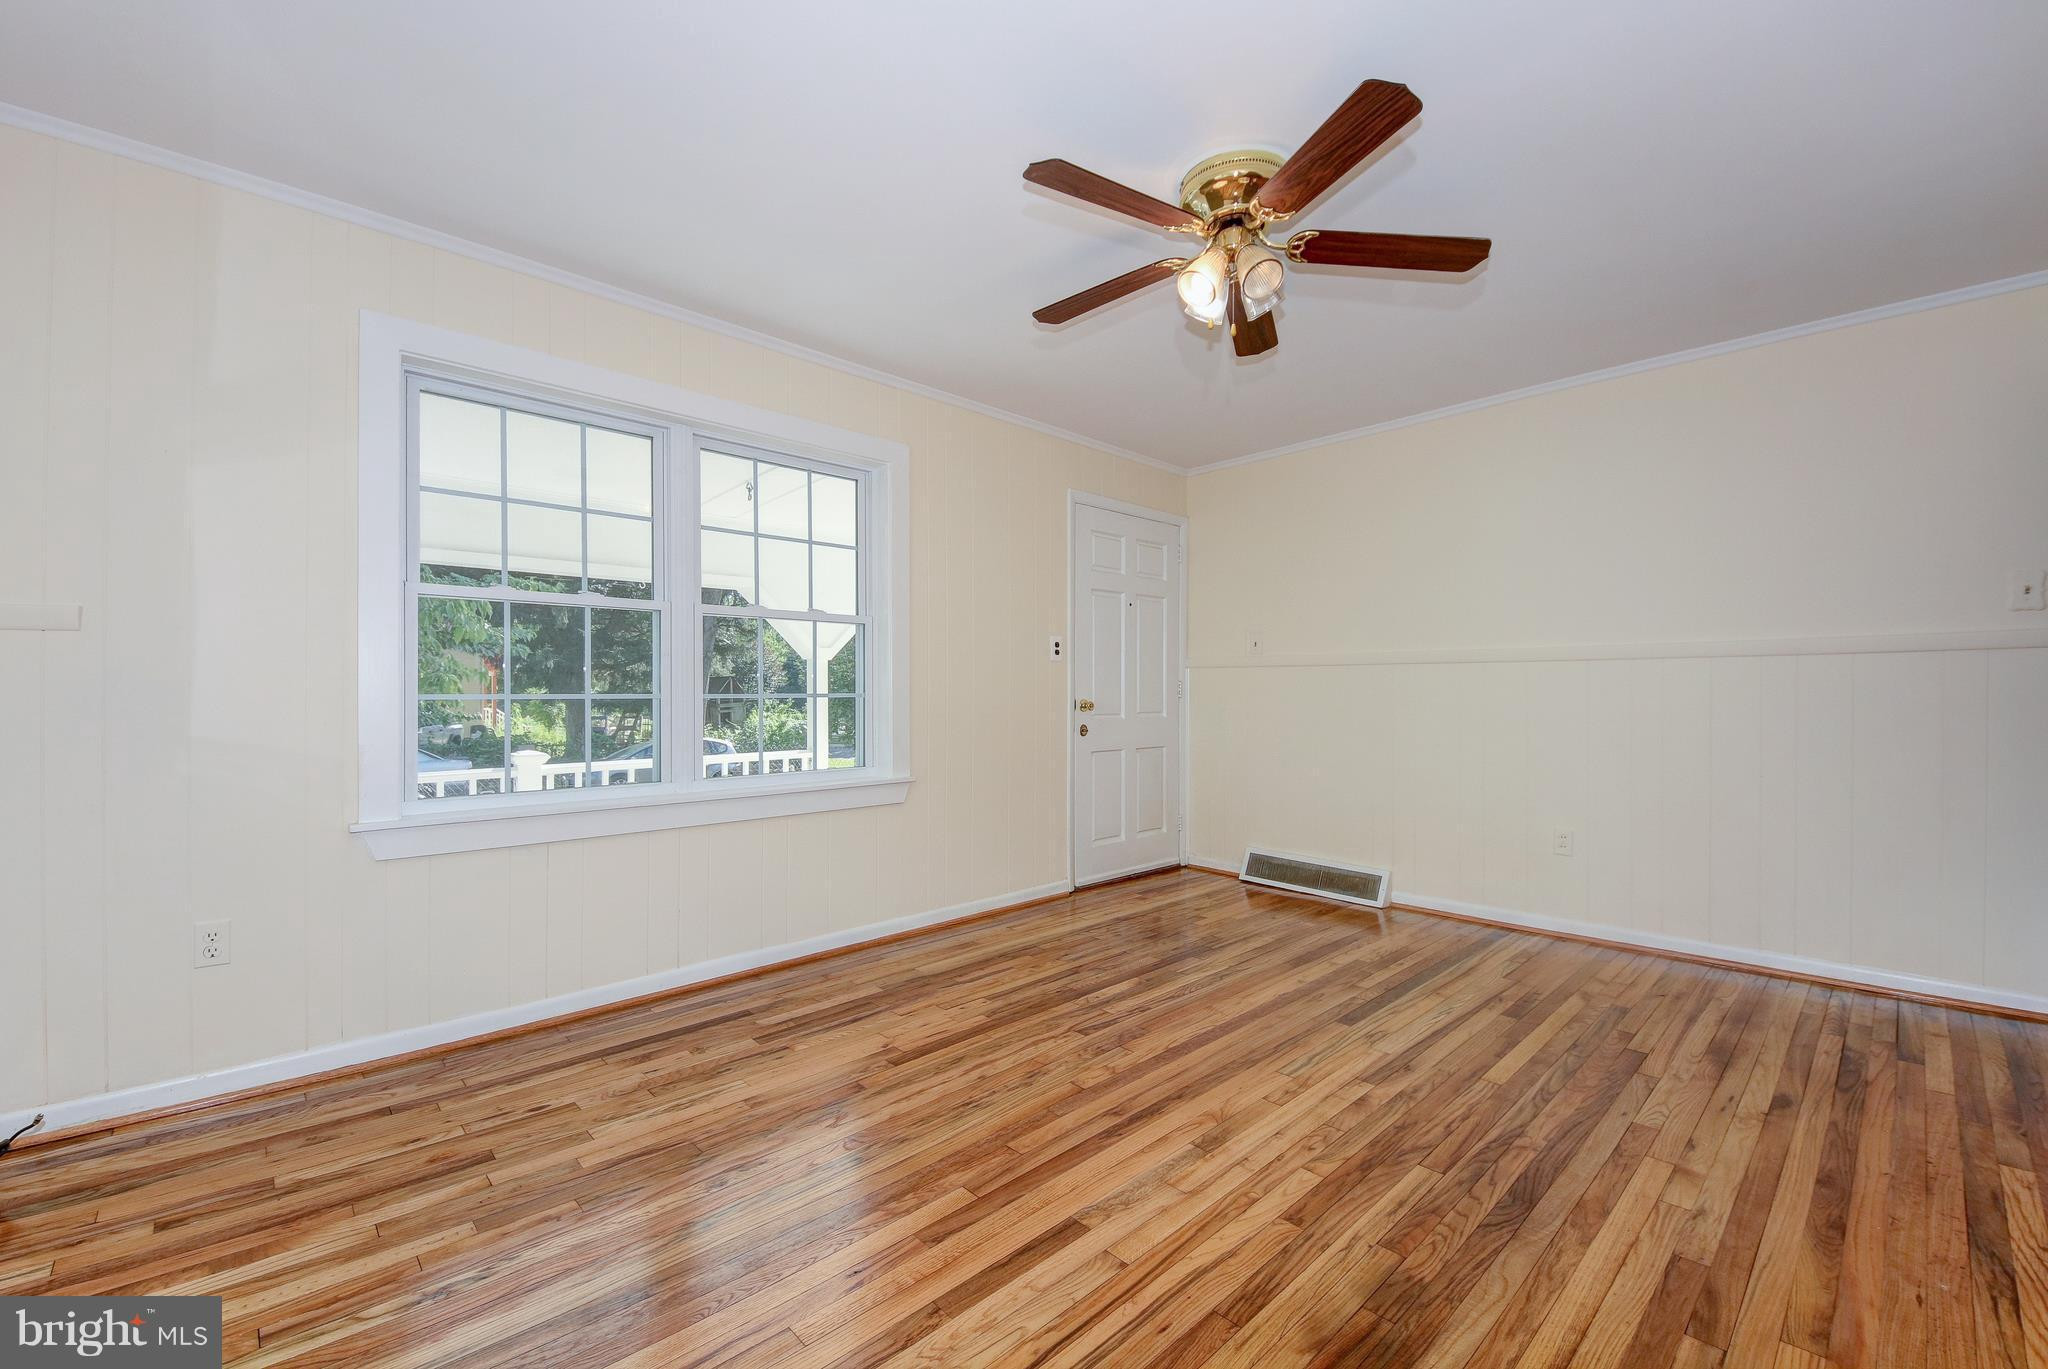 19 attractive Hardwood Floor Refinishing Silver Spring Md 2024 free download hardwood floor refinishing silver spring md of 12331 charles road silver spring md 20906 sold listing mls intended for 12331 charles road silver spring md 20906